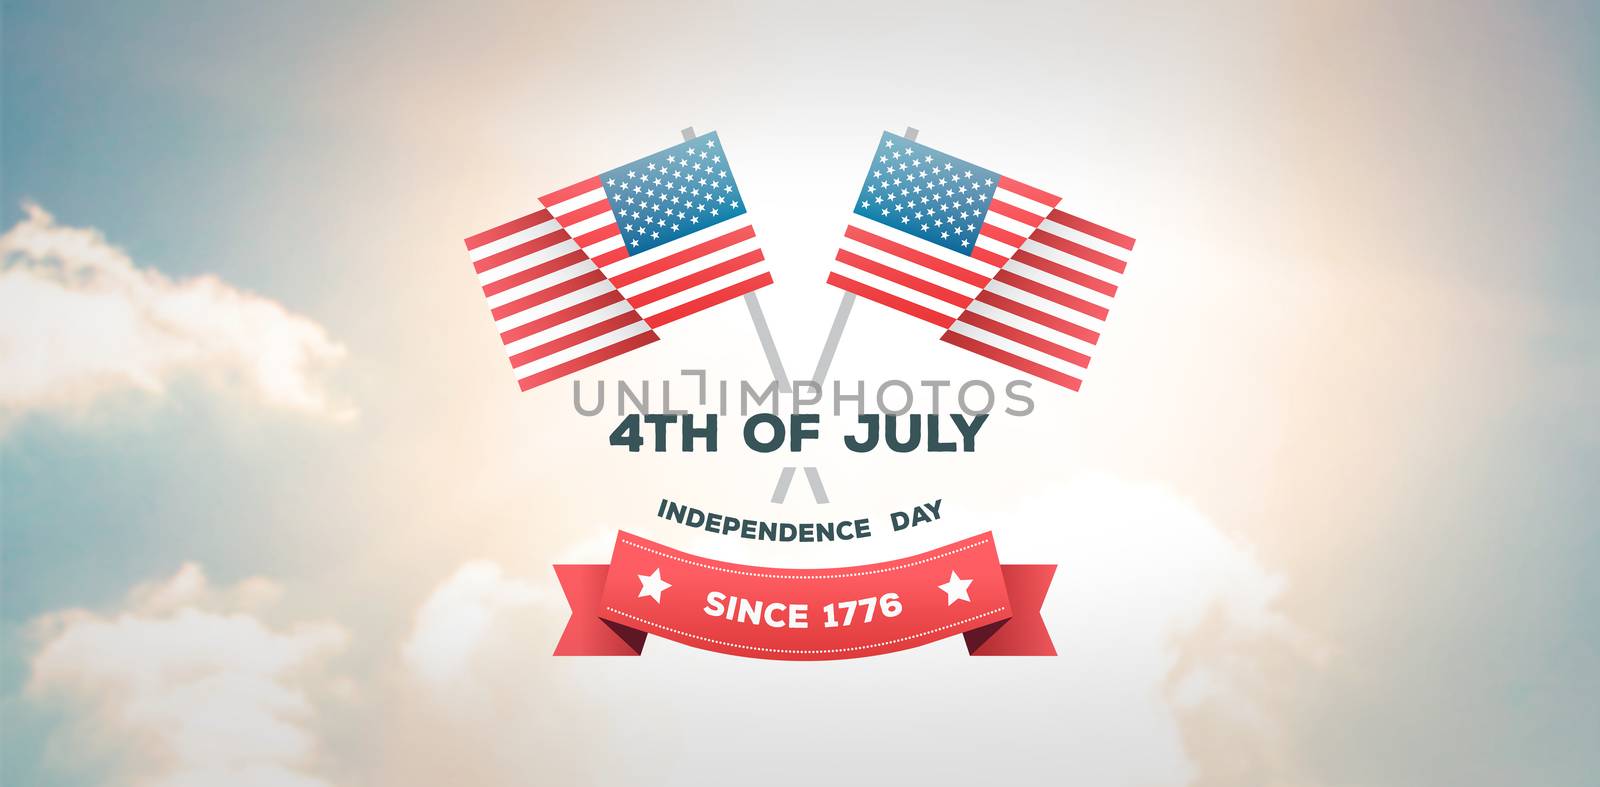 Independence day graphic against sky